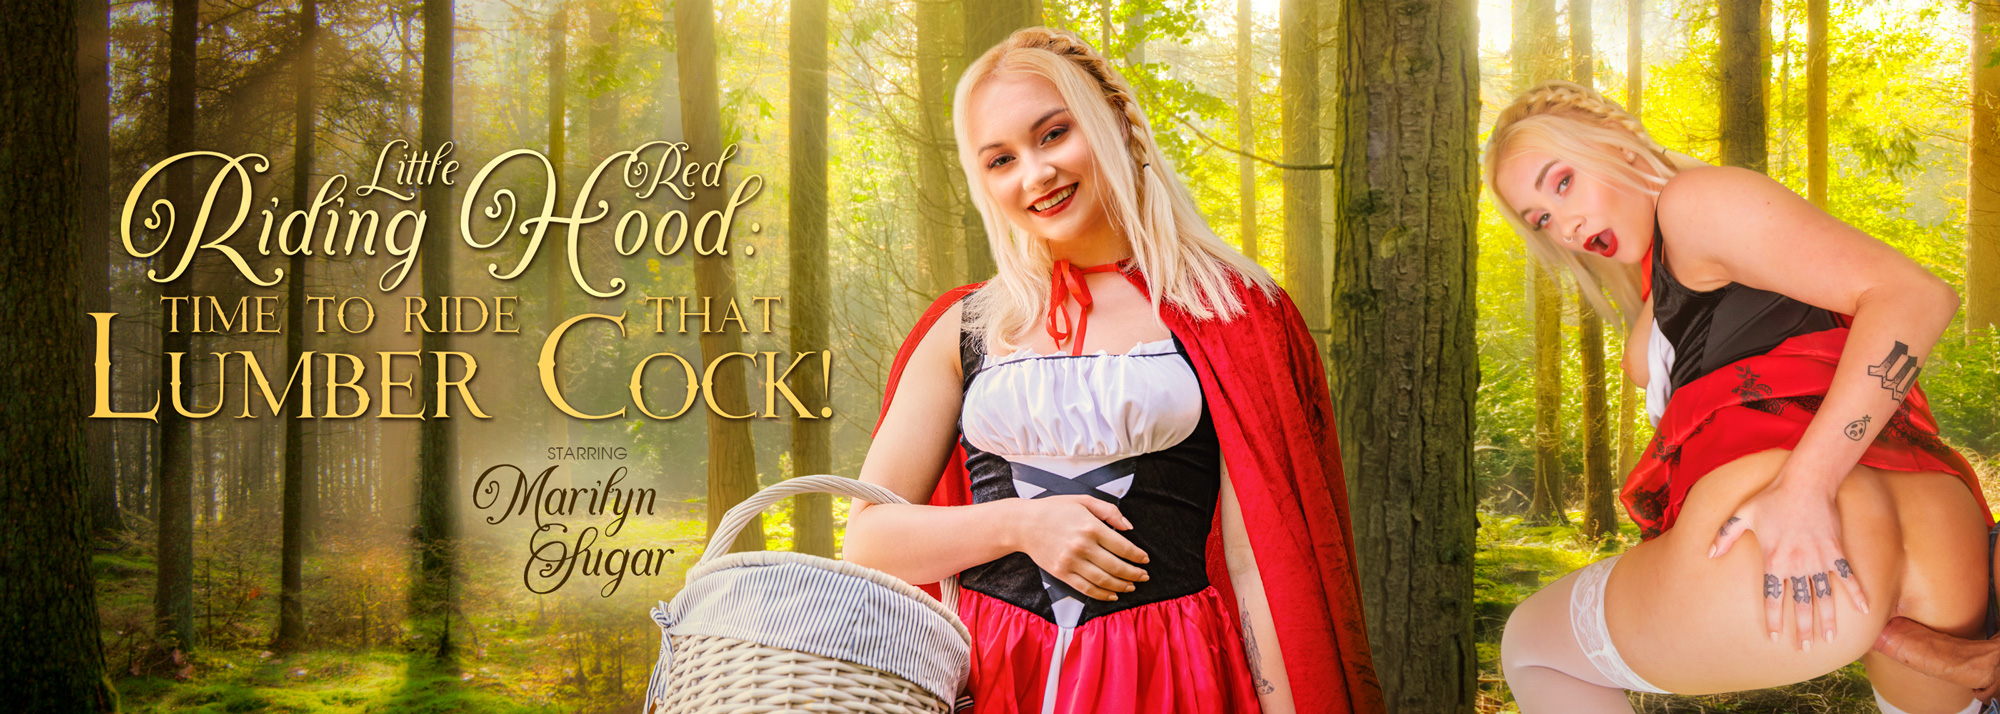 Www Red Video Com - Little Red Riding Hood: Time to Ride That Lumber Cock! with Marilyn Sugar  VR Porn Video in 4K-8K | VR Bangers